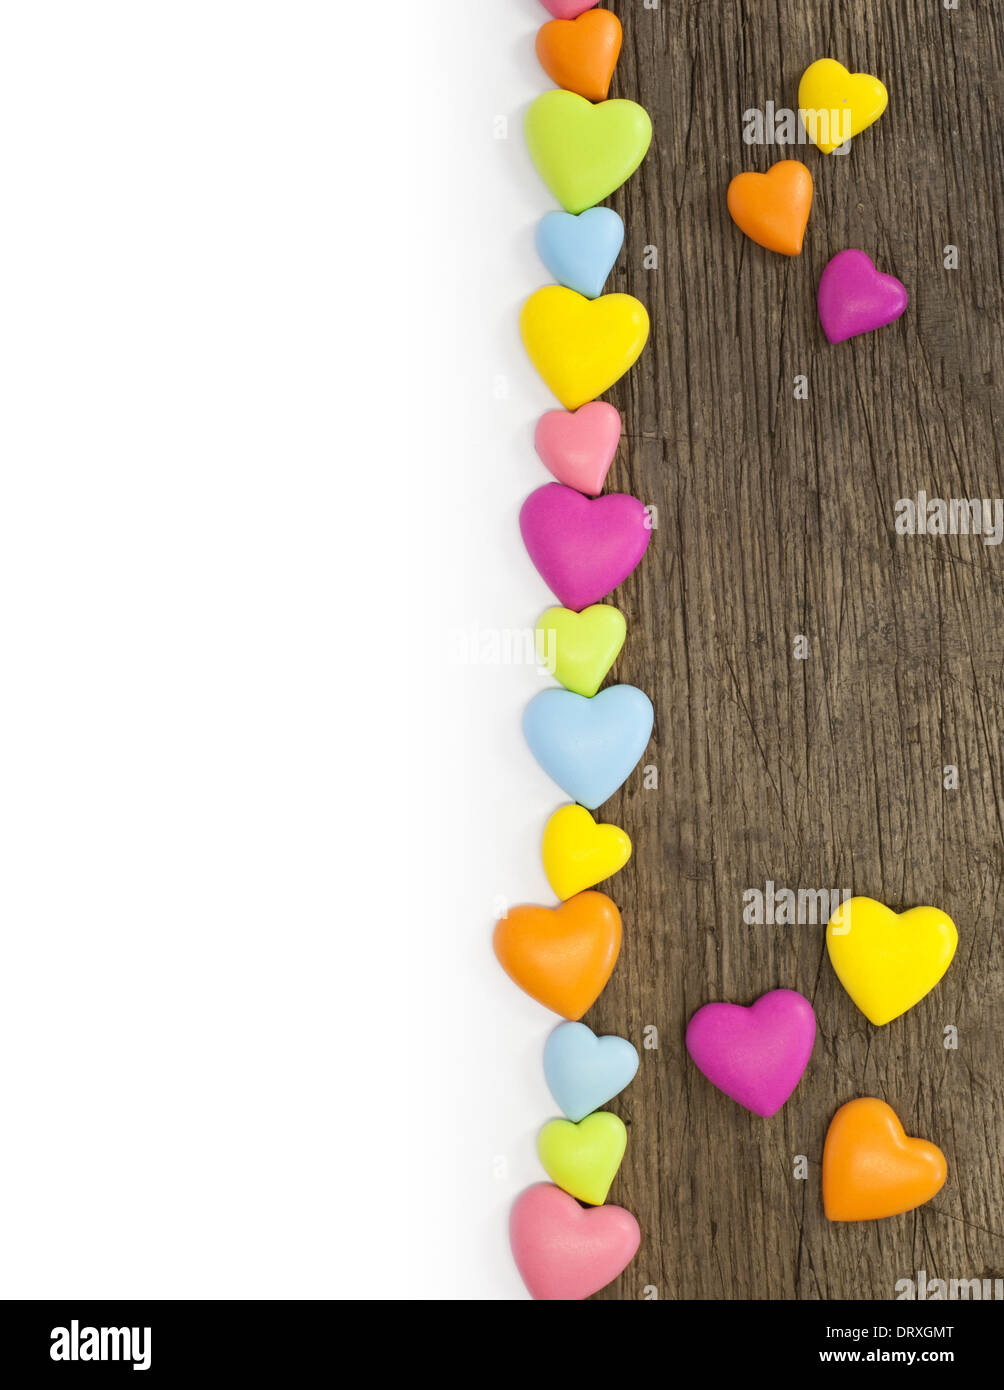 Colorful hearts on wooden background. All isolated on white. Stock Photo